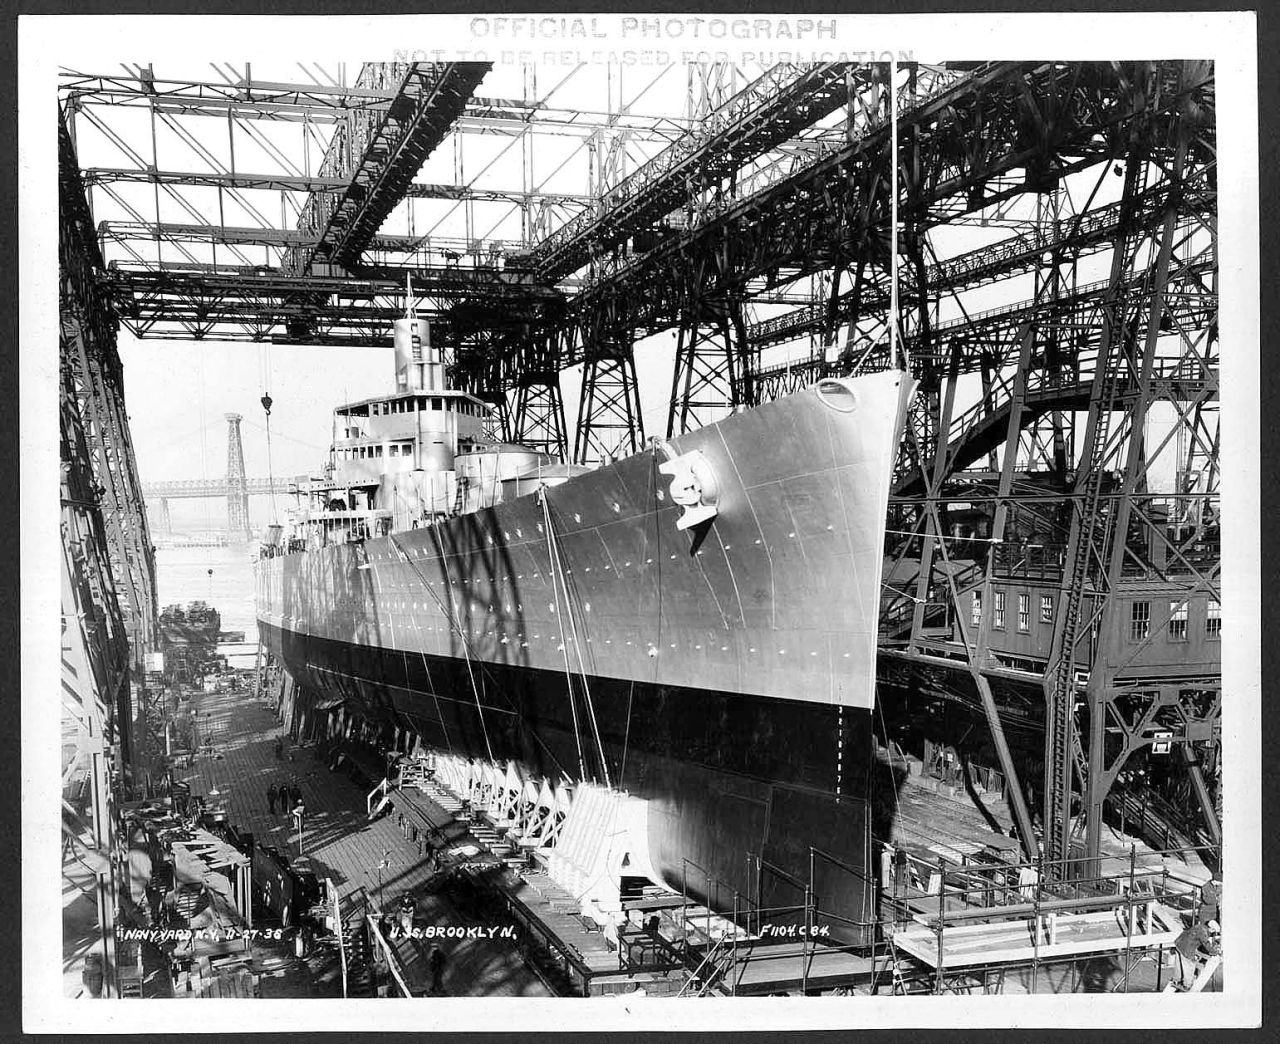 The famous New York shipyard built and repaired some of the world's most renowned military vessels. Here, the USS Brooklyn is constructed the yard in 1936.